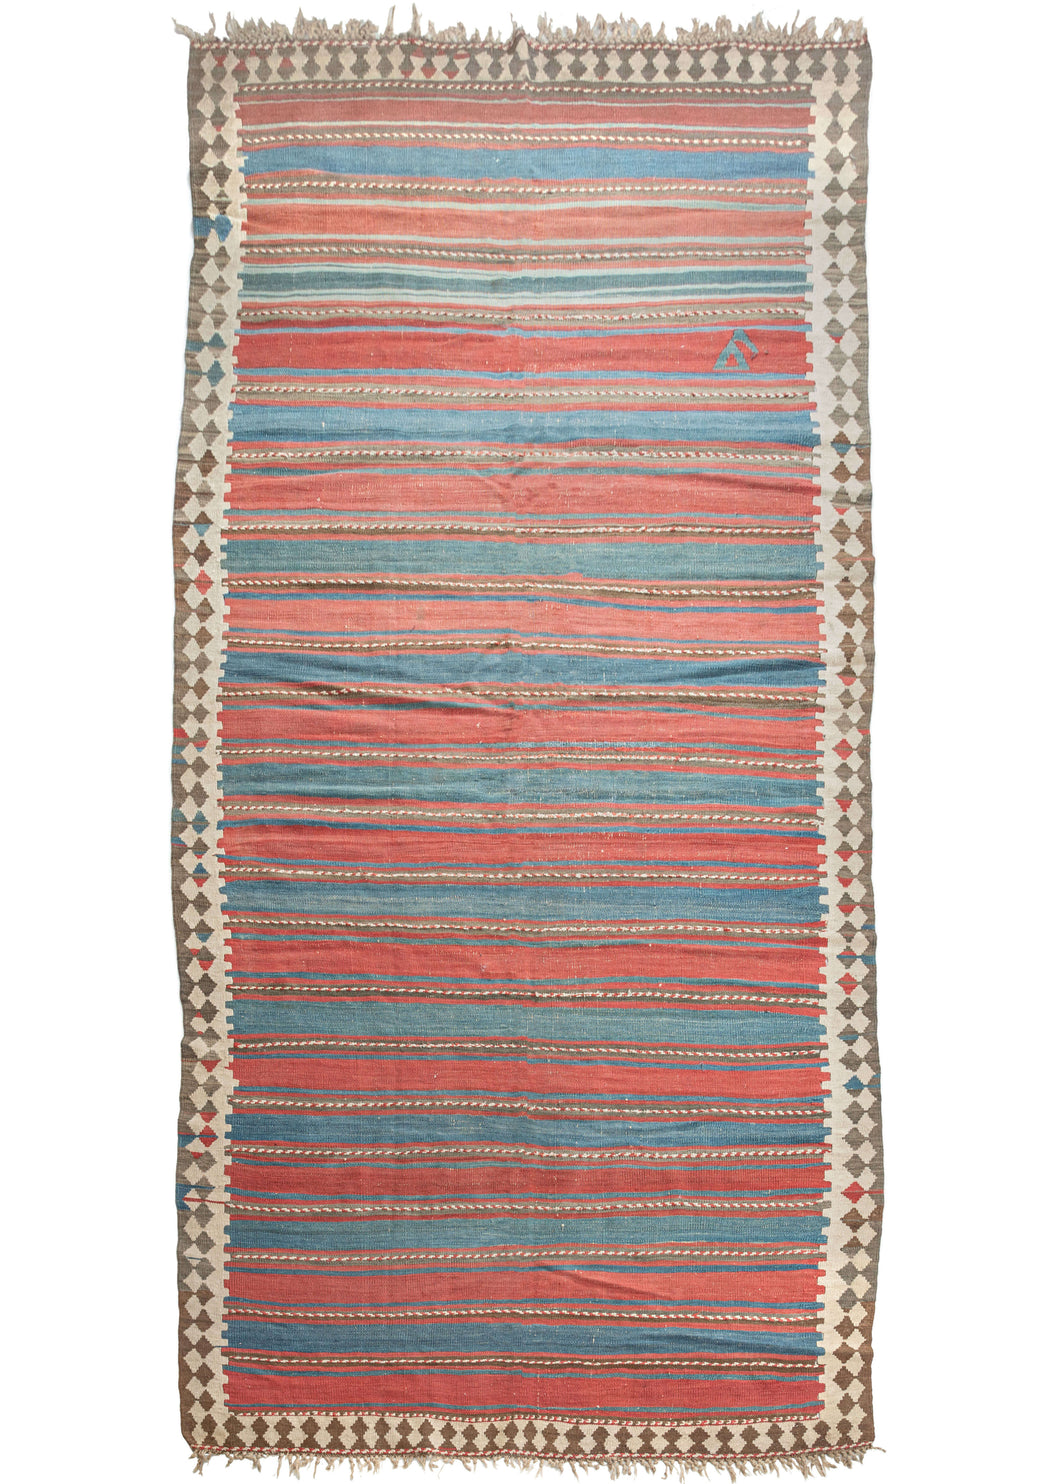 Antique Shahsavan striped kelleghi kilim featuring a beautifully simple design of organically drawn red and blue stripes with wavy movement and wonderful abrash (natural dye variation). Subtle candy-striped​ lines of red and ivory are intermittently brocaded over the top. The border consists of a reciprocating pawns motif made of ivory and brown where at some points the bands from the field flow into the border.